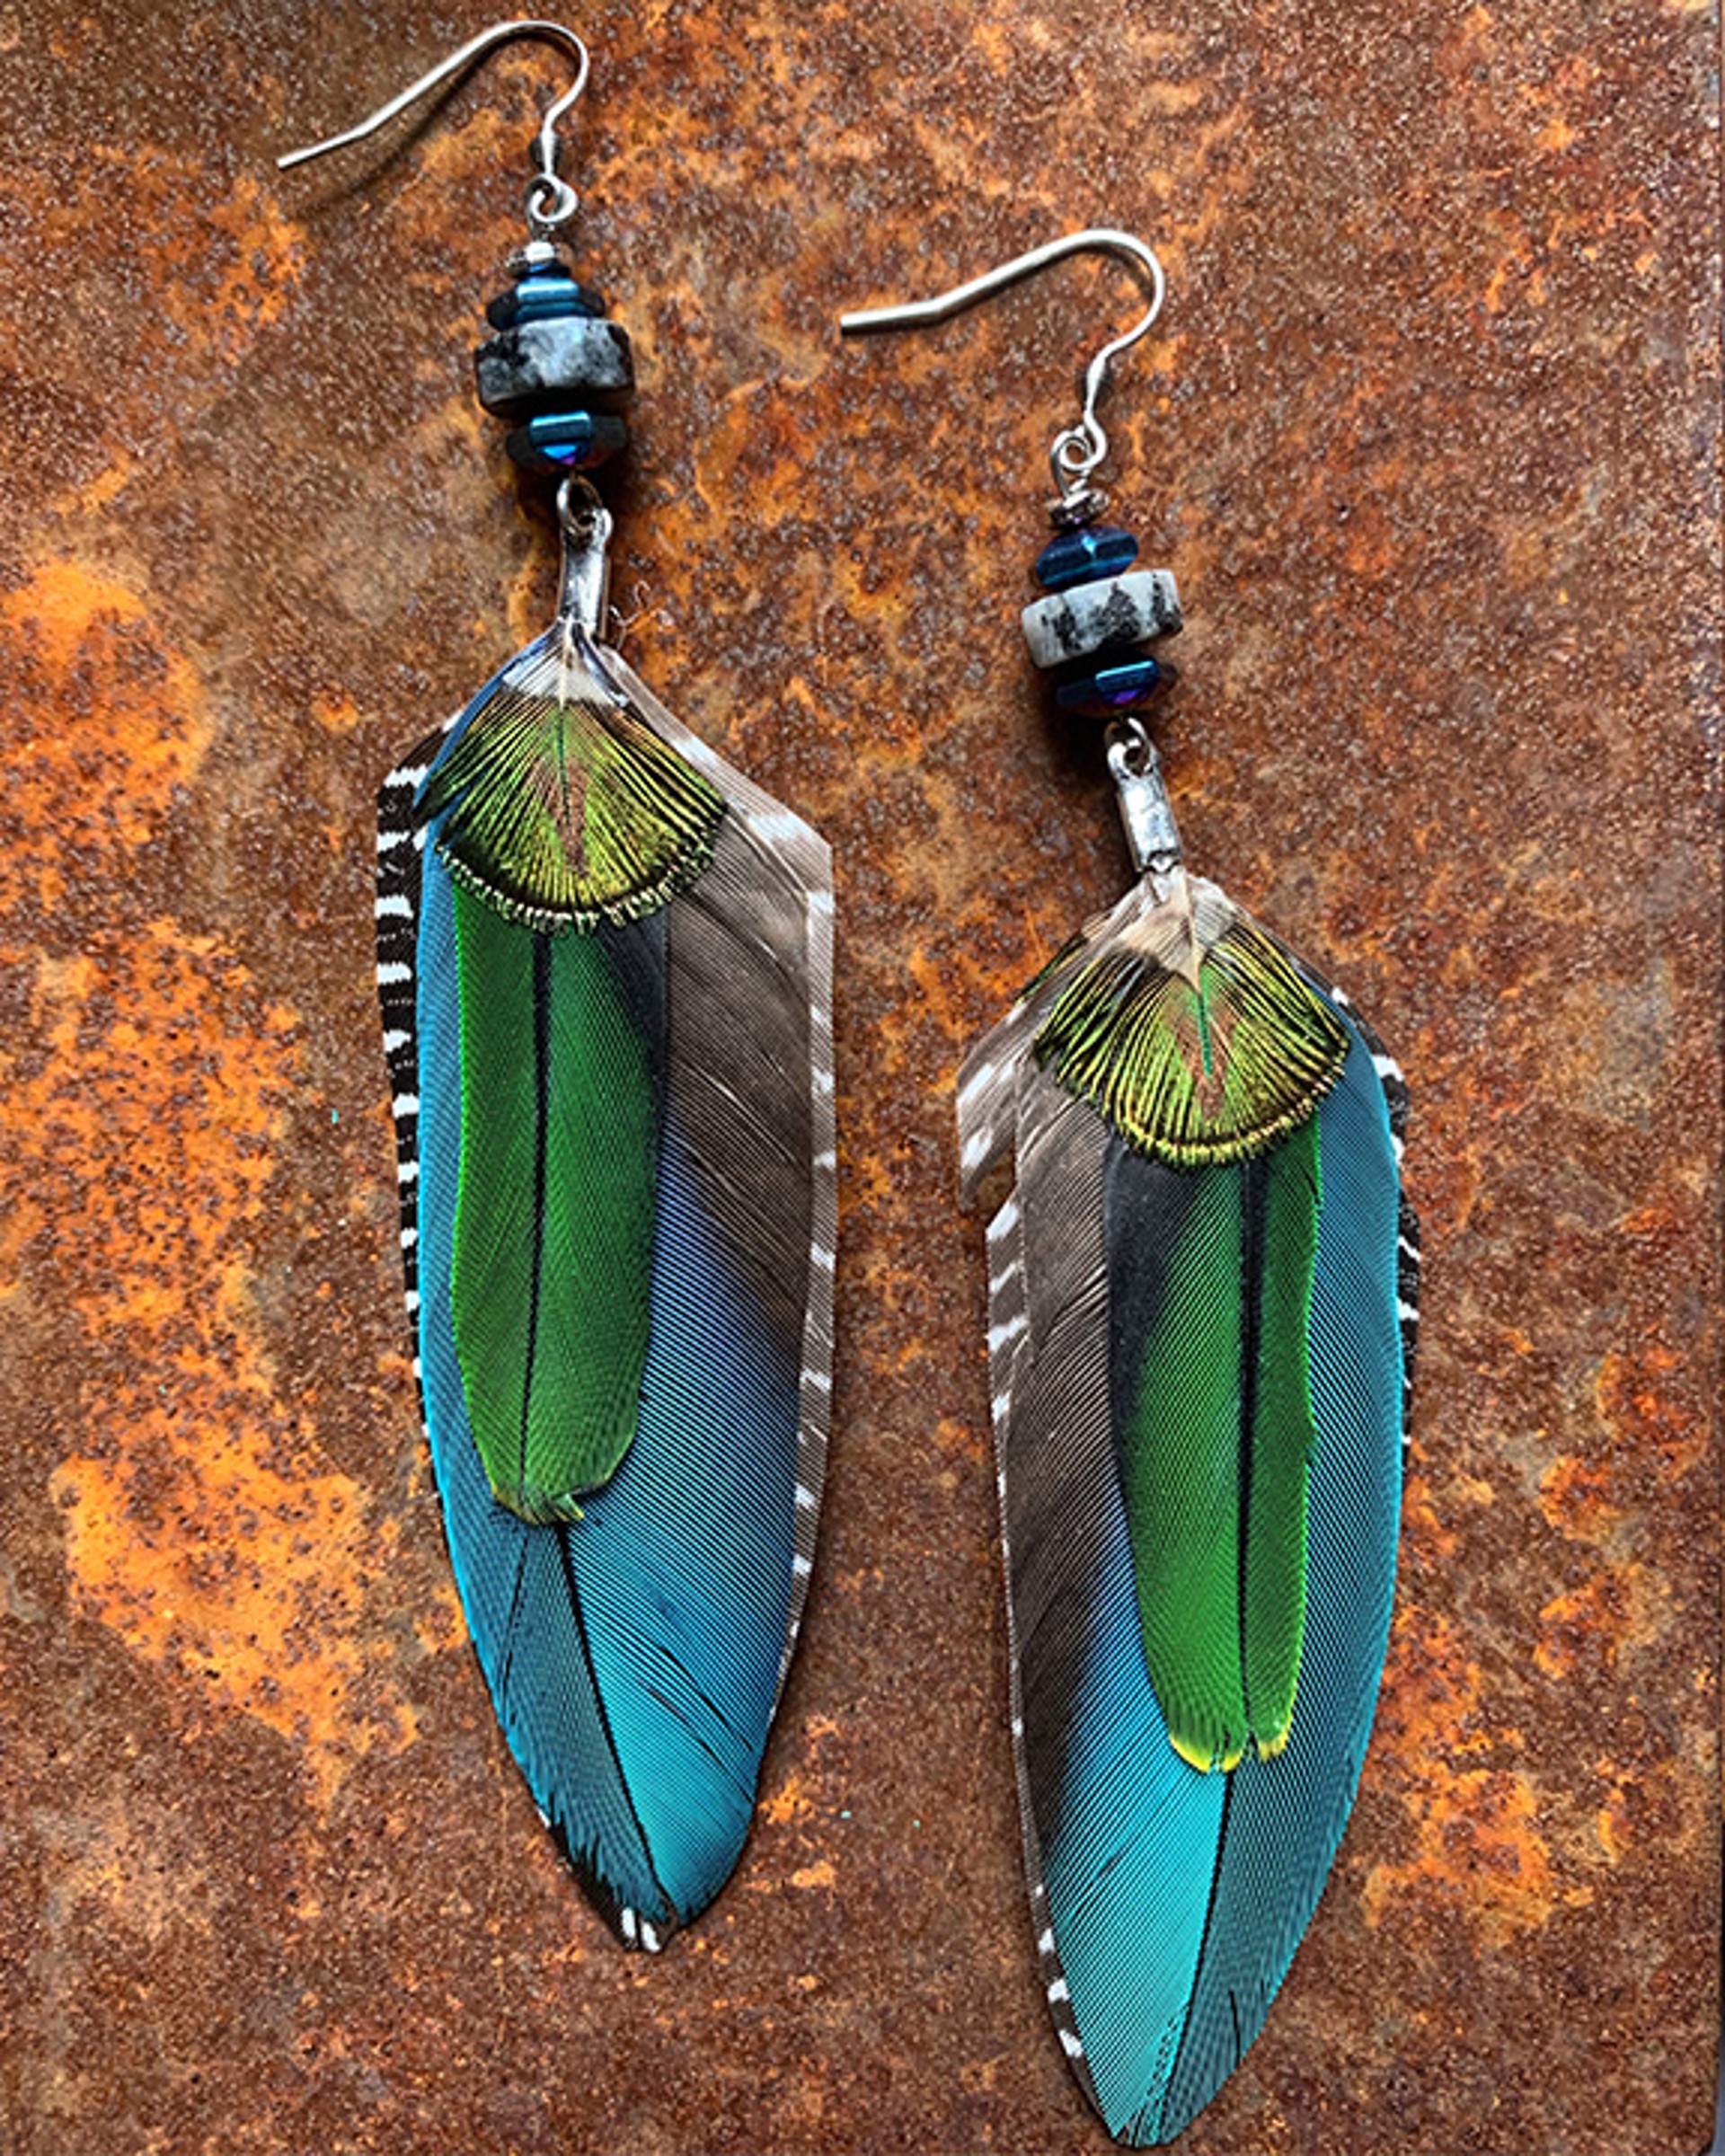 K725 Ethically Sourced Parrot Earrings by Kelly Ormsby